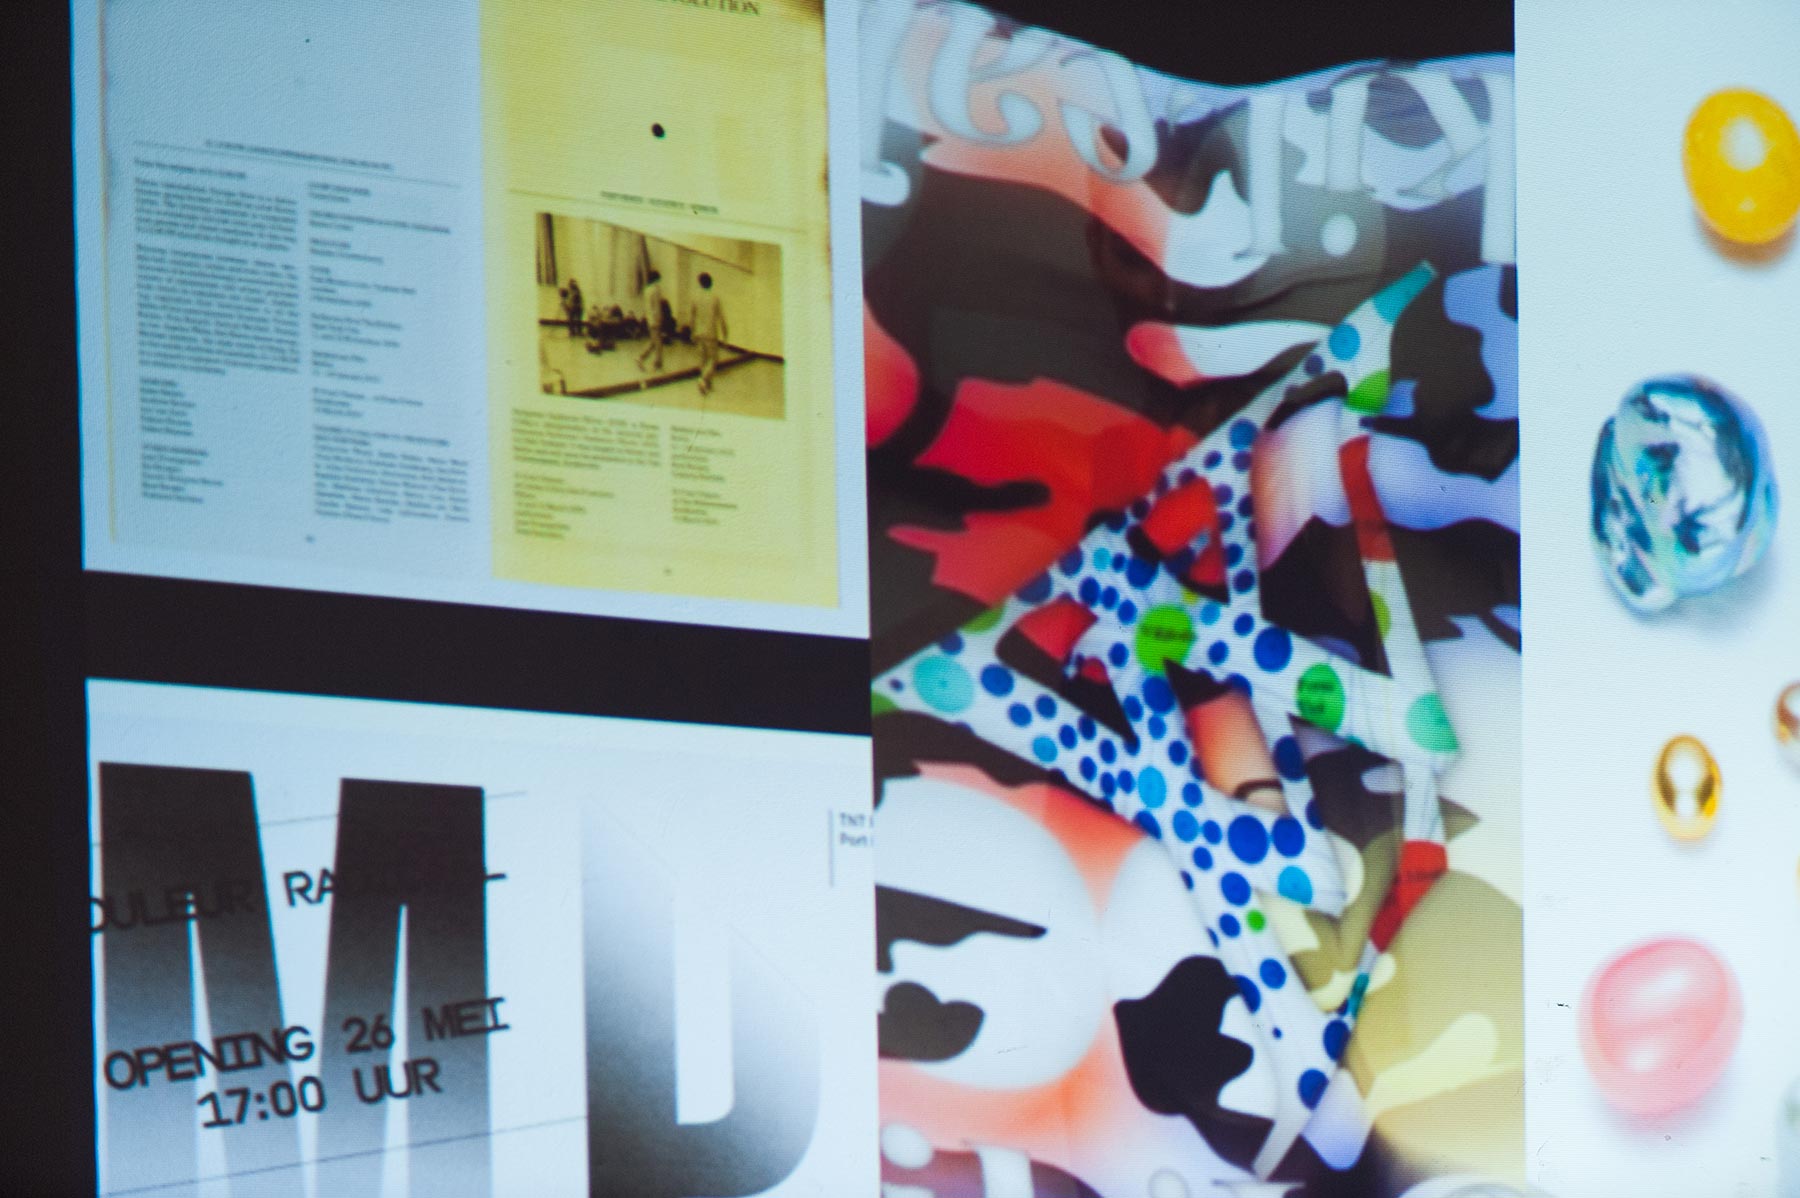 gdfs-itsnicethat-charliedoran-workshop11